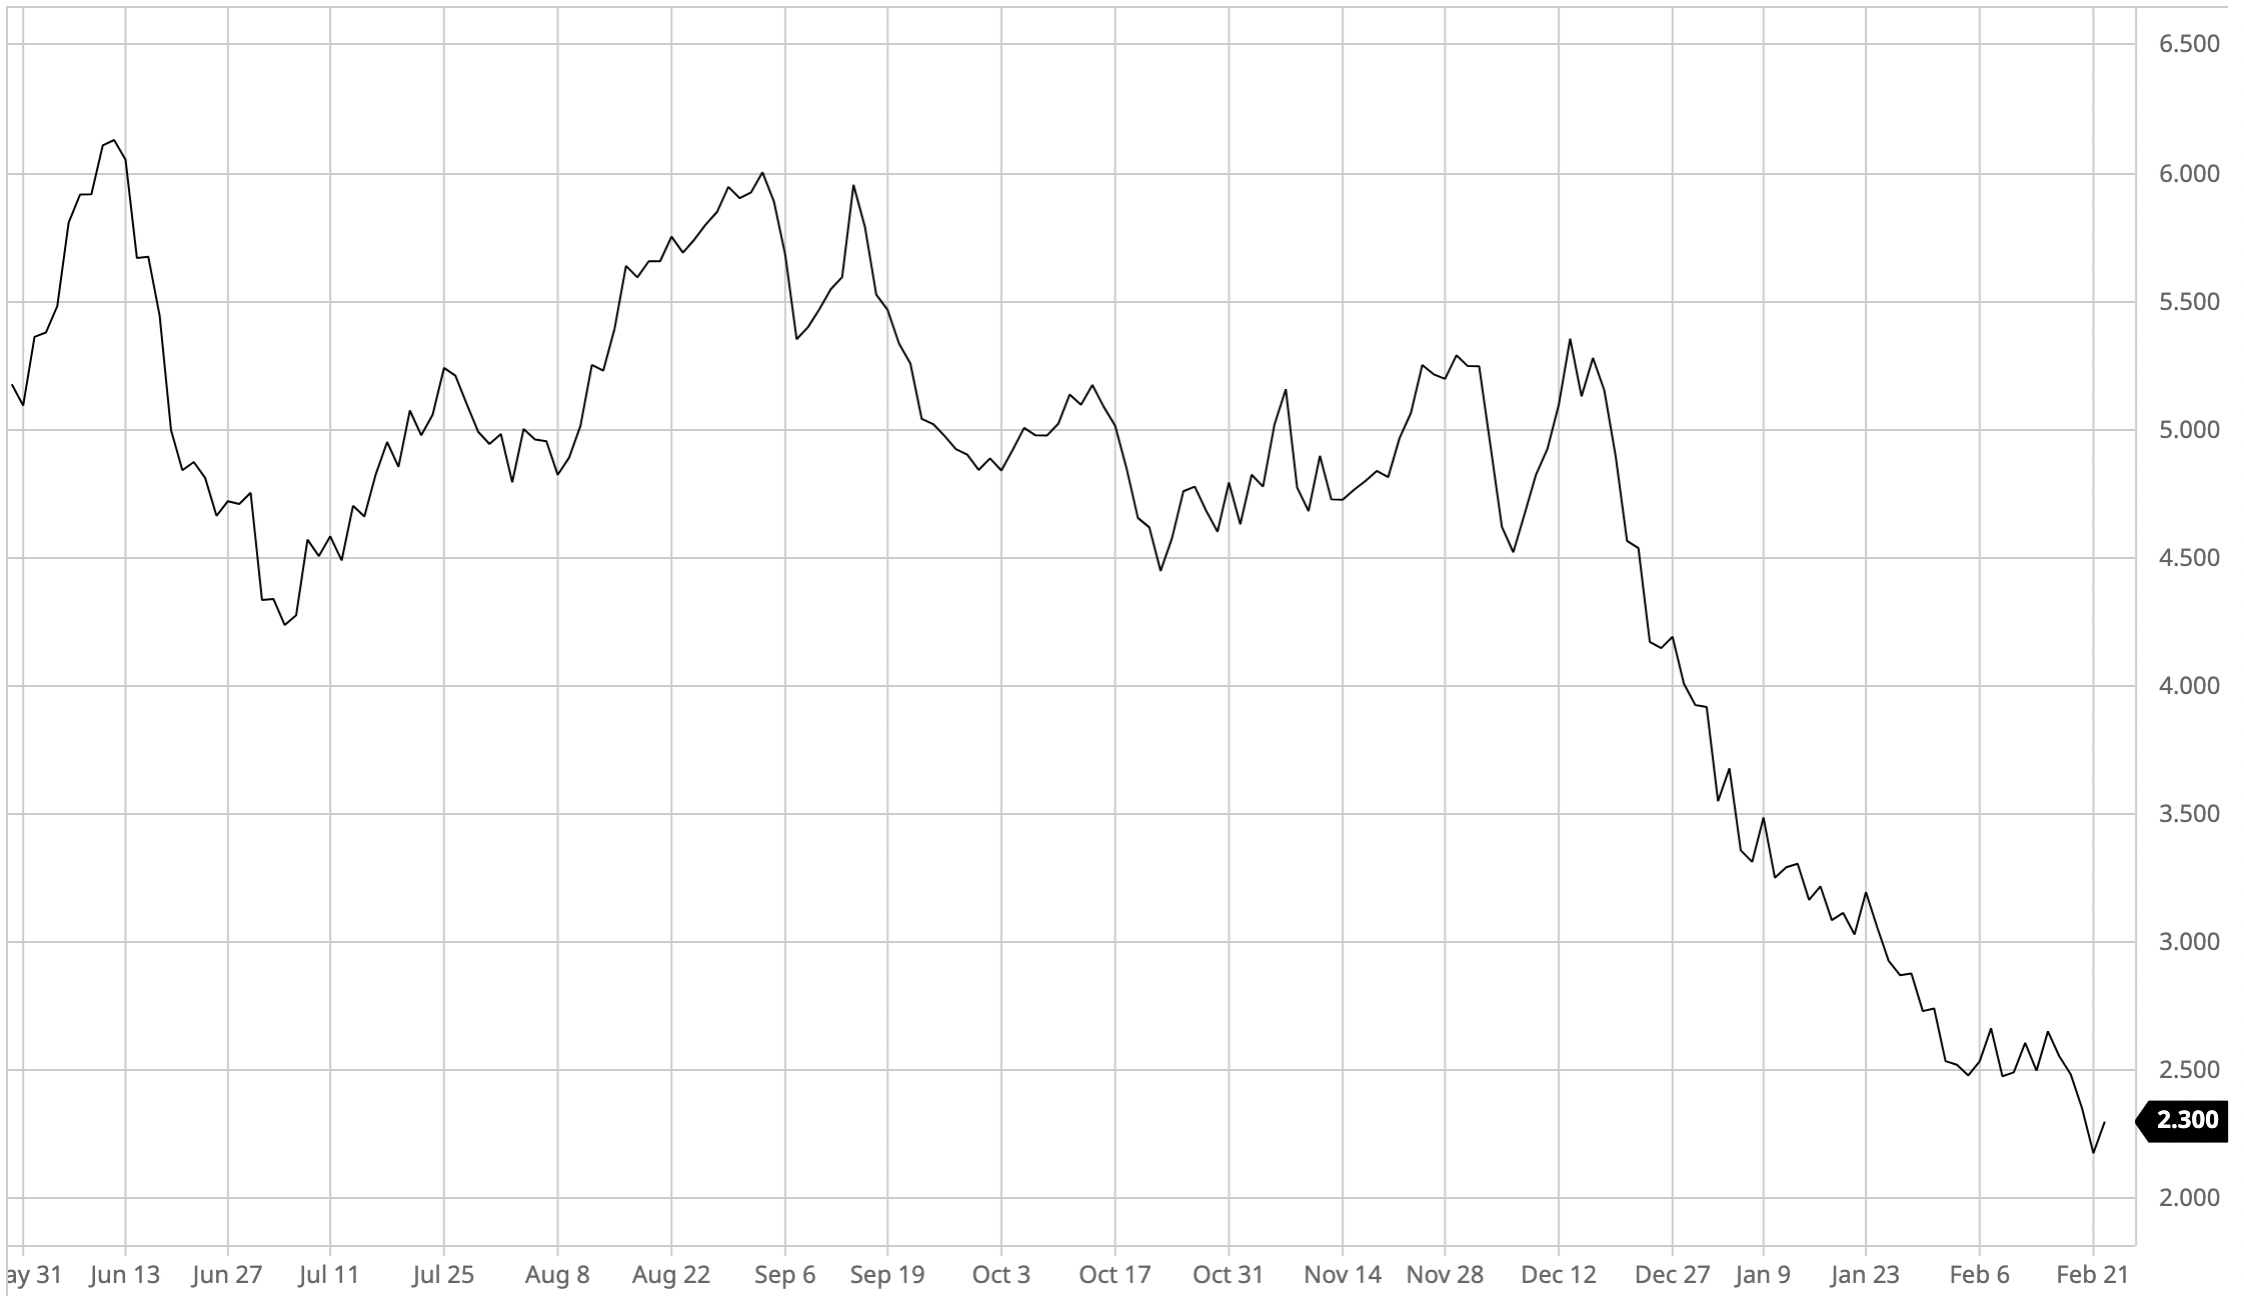 Natural gas prices have decreased to the lowest level since September 2020